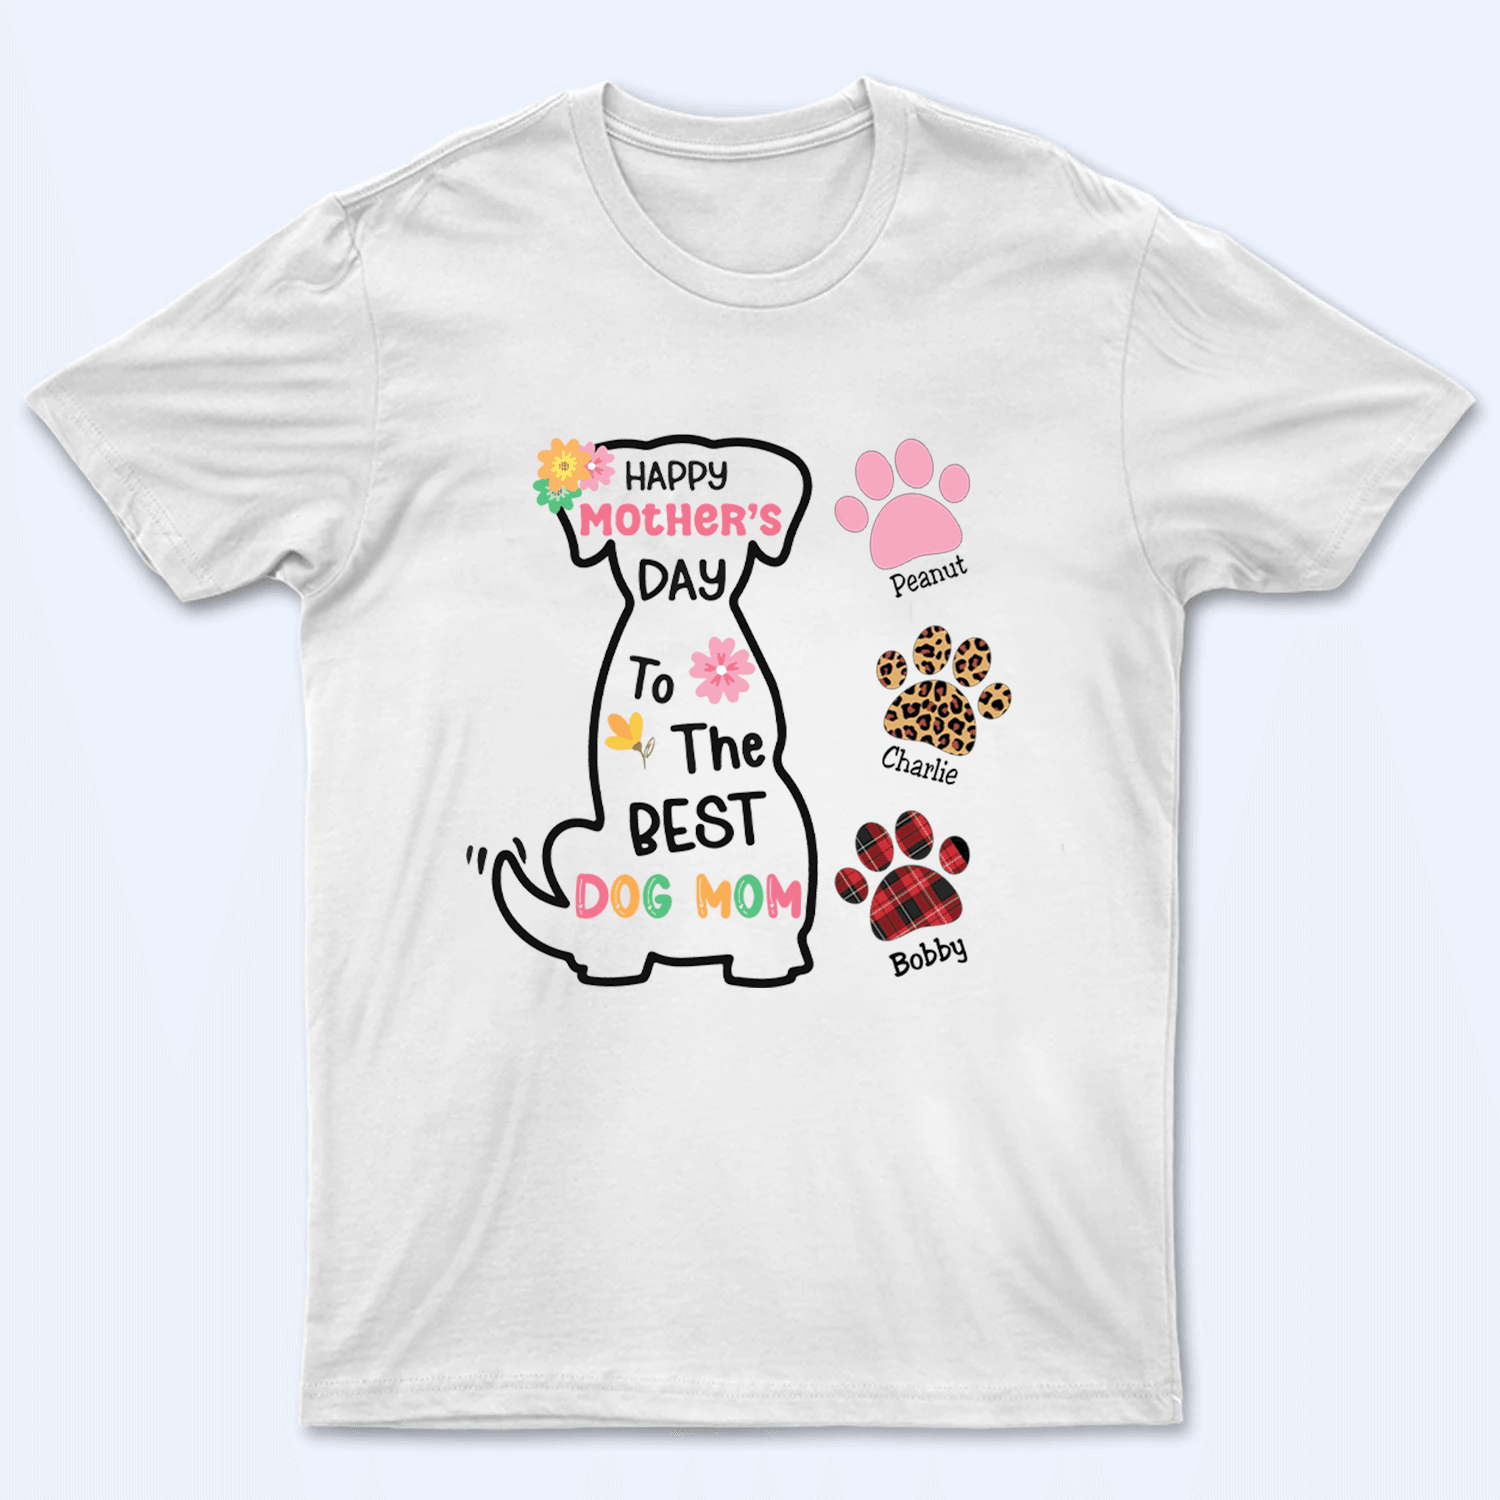 Happy Mother's Day To The Best Dog Mom - Personalized Custom T Shirt - Birthday, Loving, Funny Gift for Dog Mom, Dog Lovers, Pet Gifts for Mother's Day